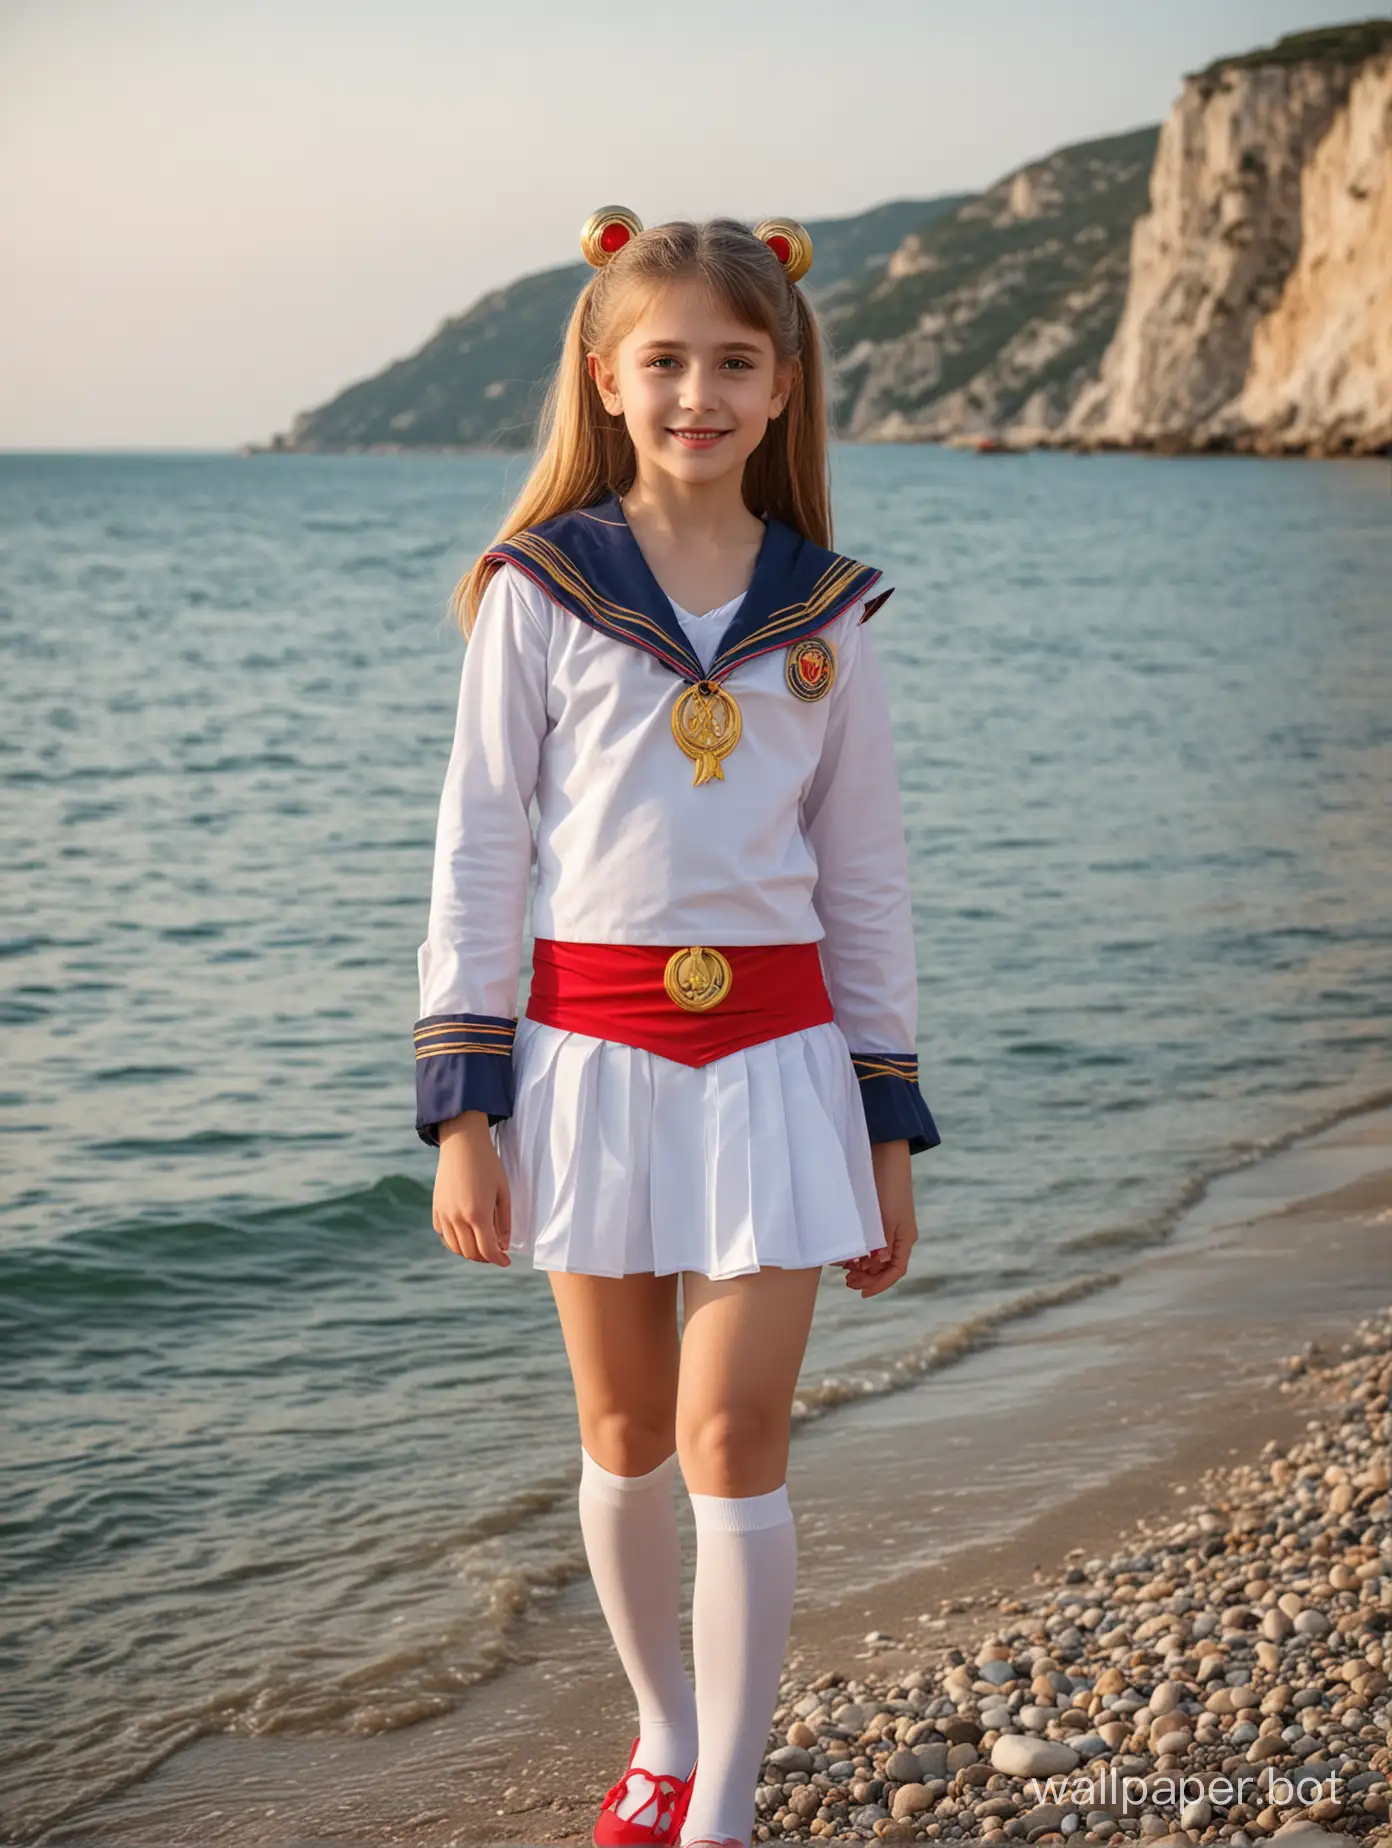 Dynamic-Sailor-Moon-Costume-Pose-with-Smiling-Children-by-the-Sea